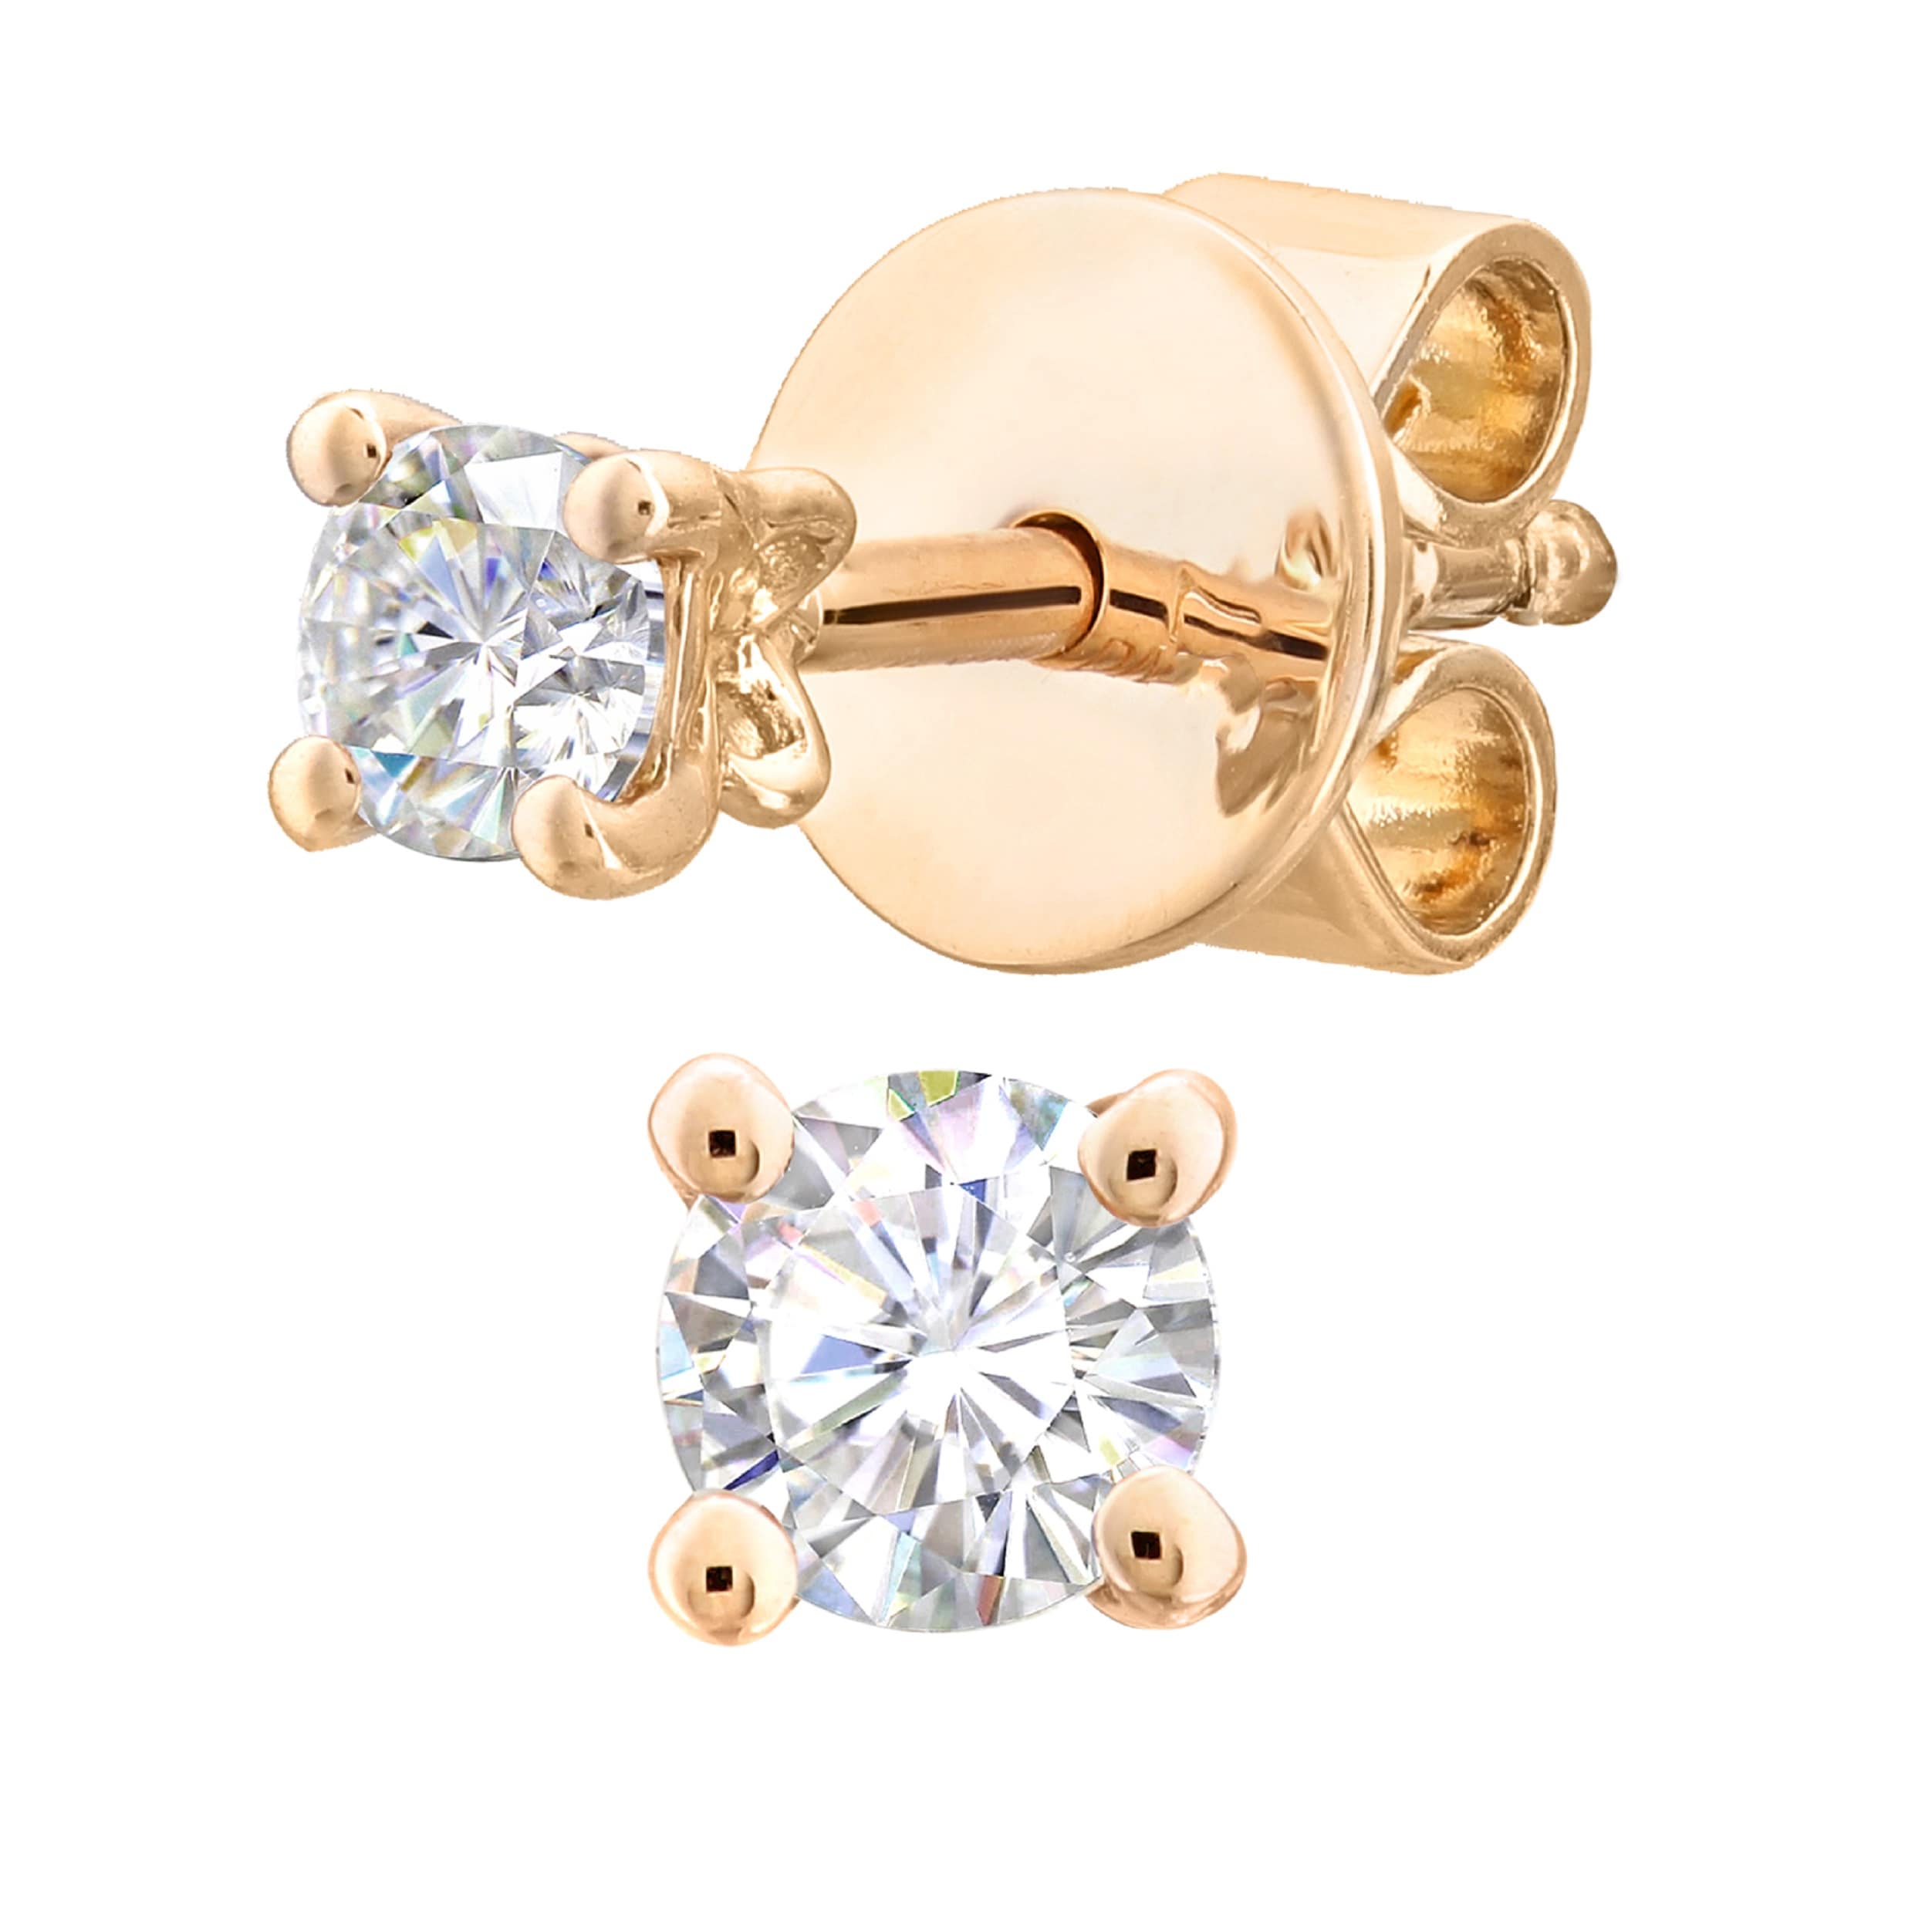 18ct Yellow Gold 0.15cttw Diamond 4 Claw Stud Earrings